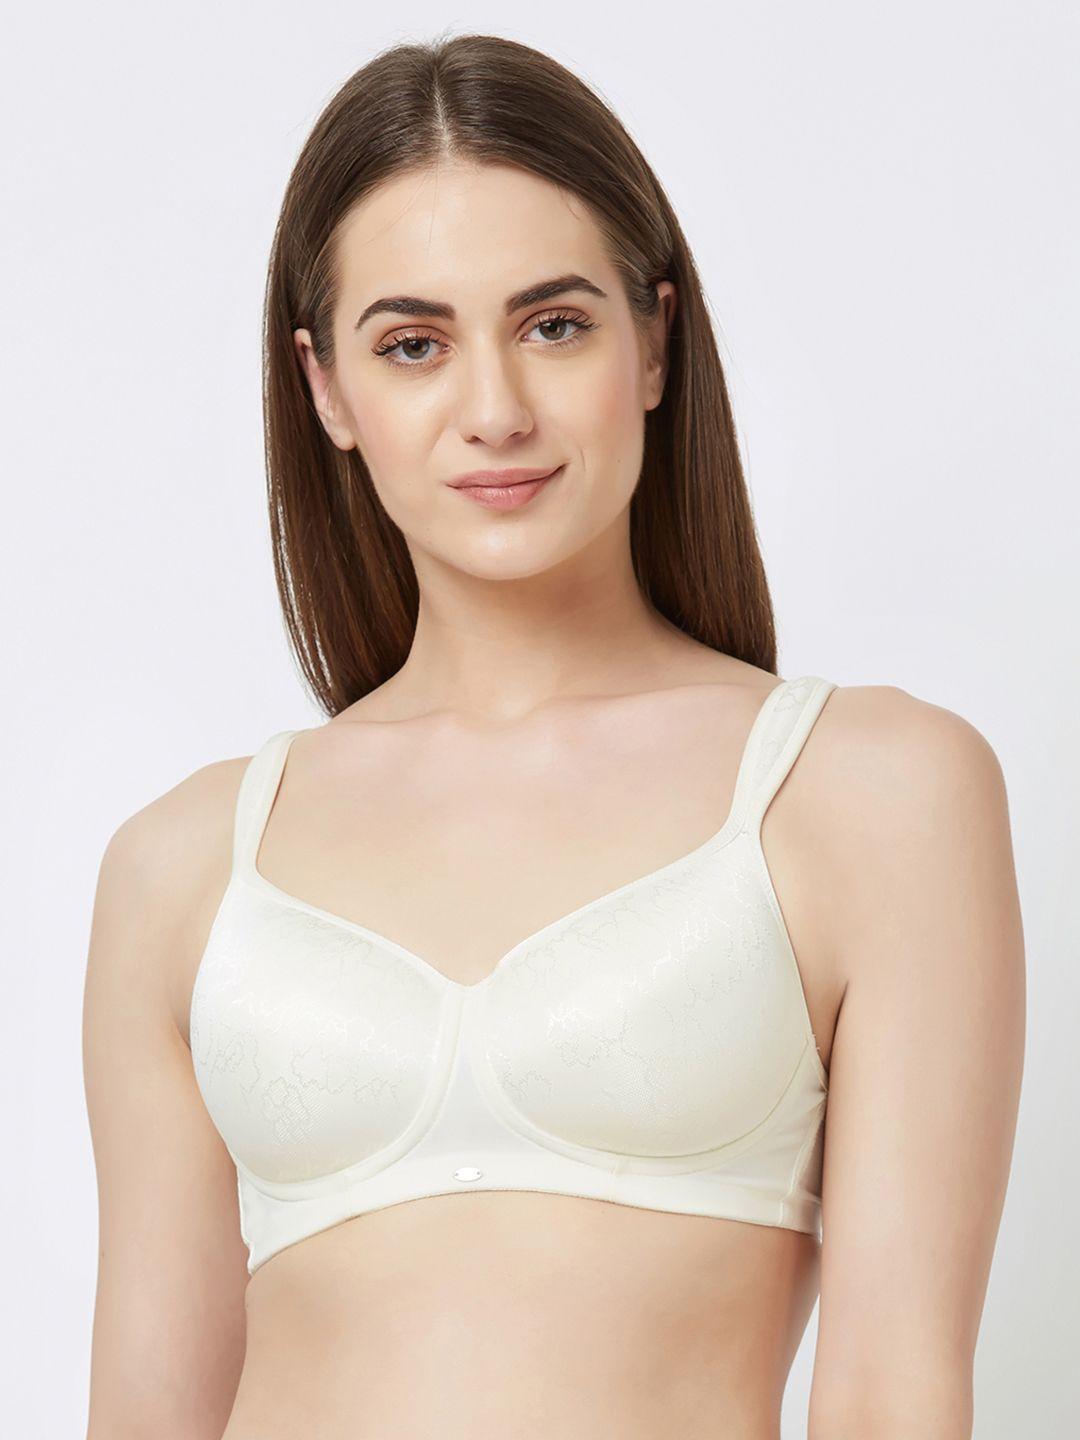 soie-off-white-solid-non-wired-lightly-padded-t-shirt-bra-cb-126ivory